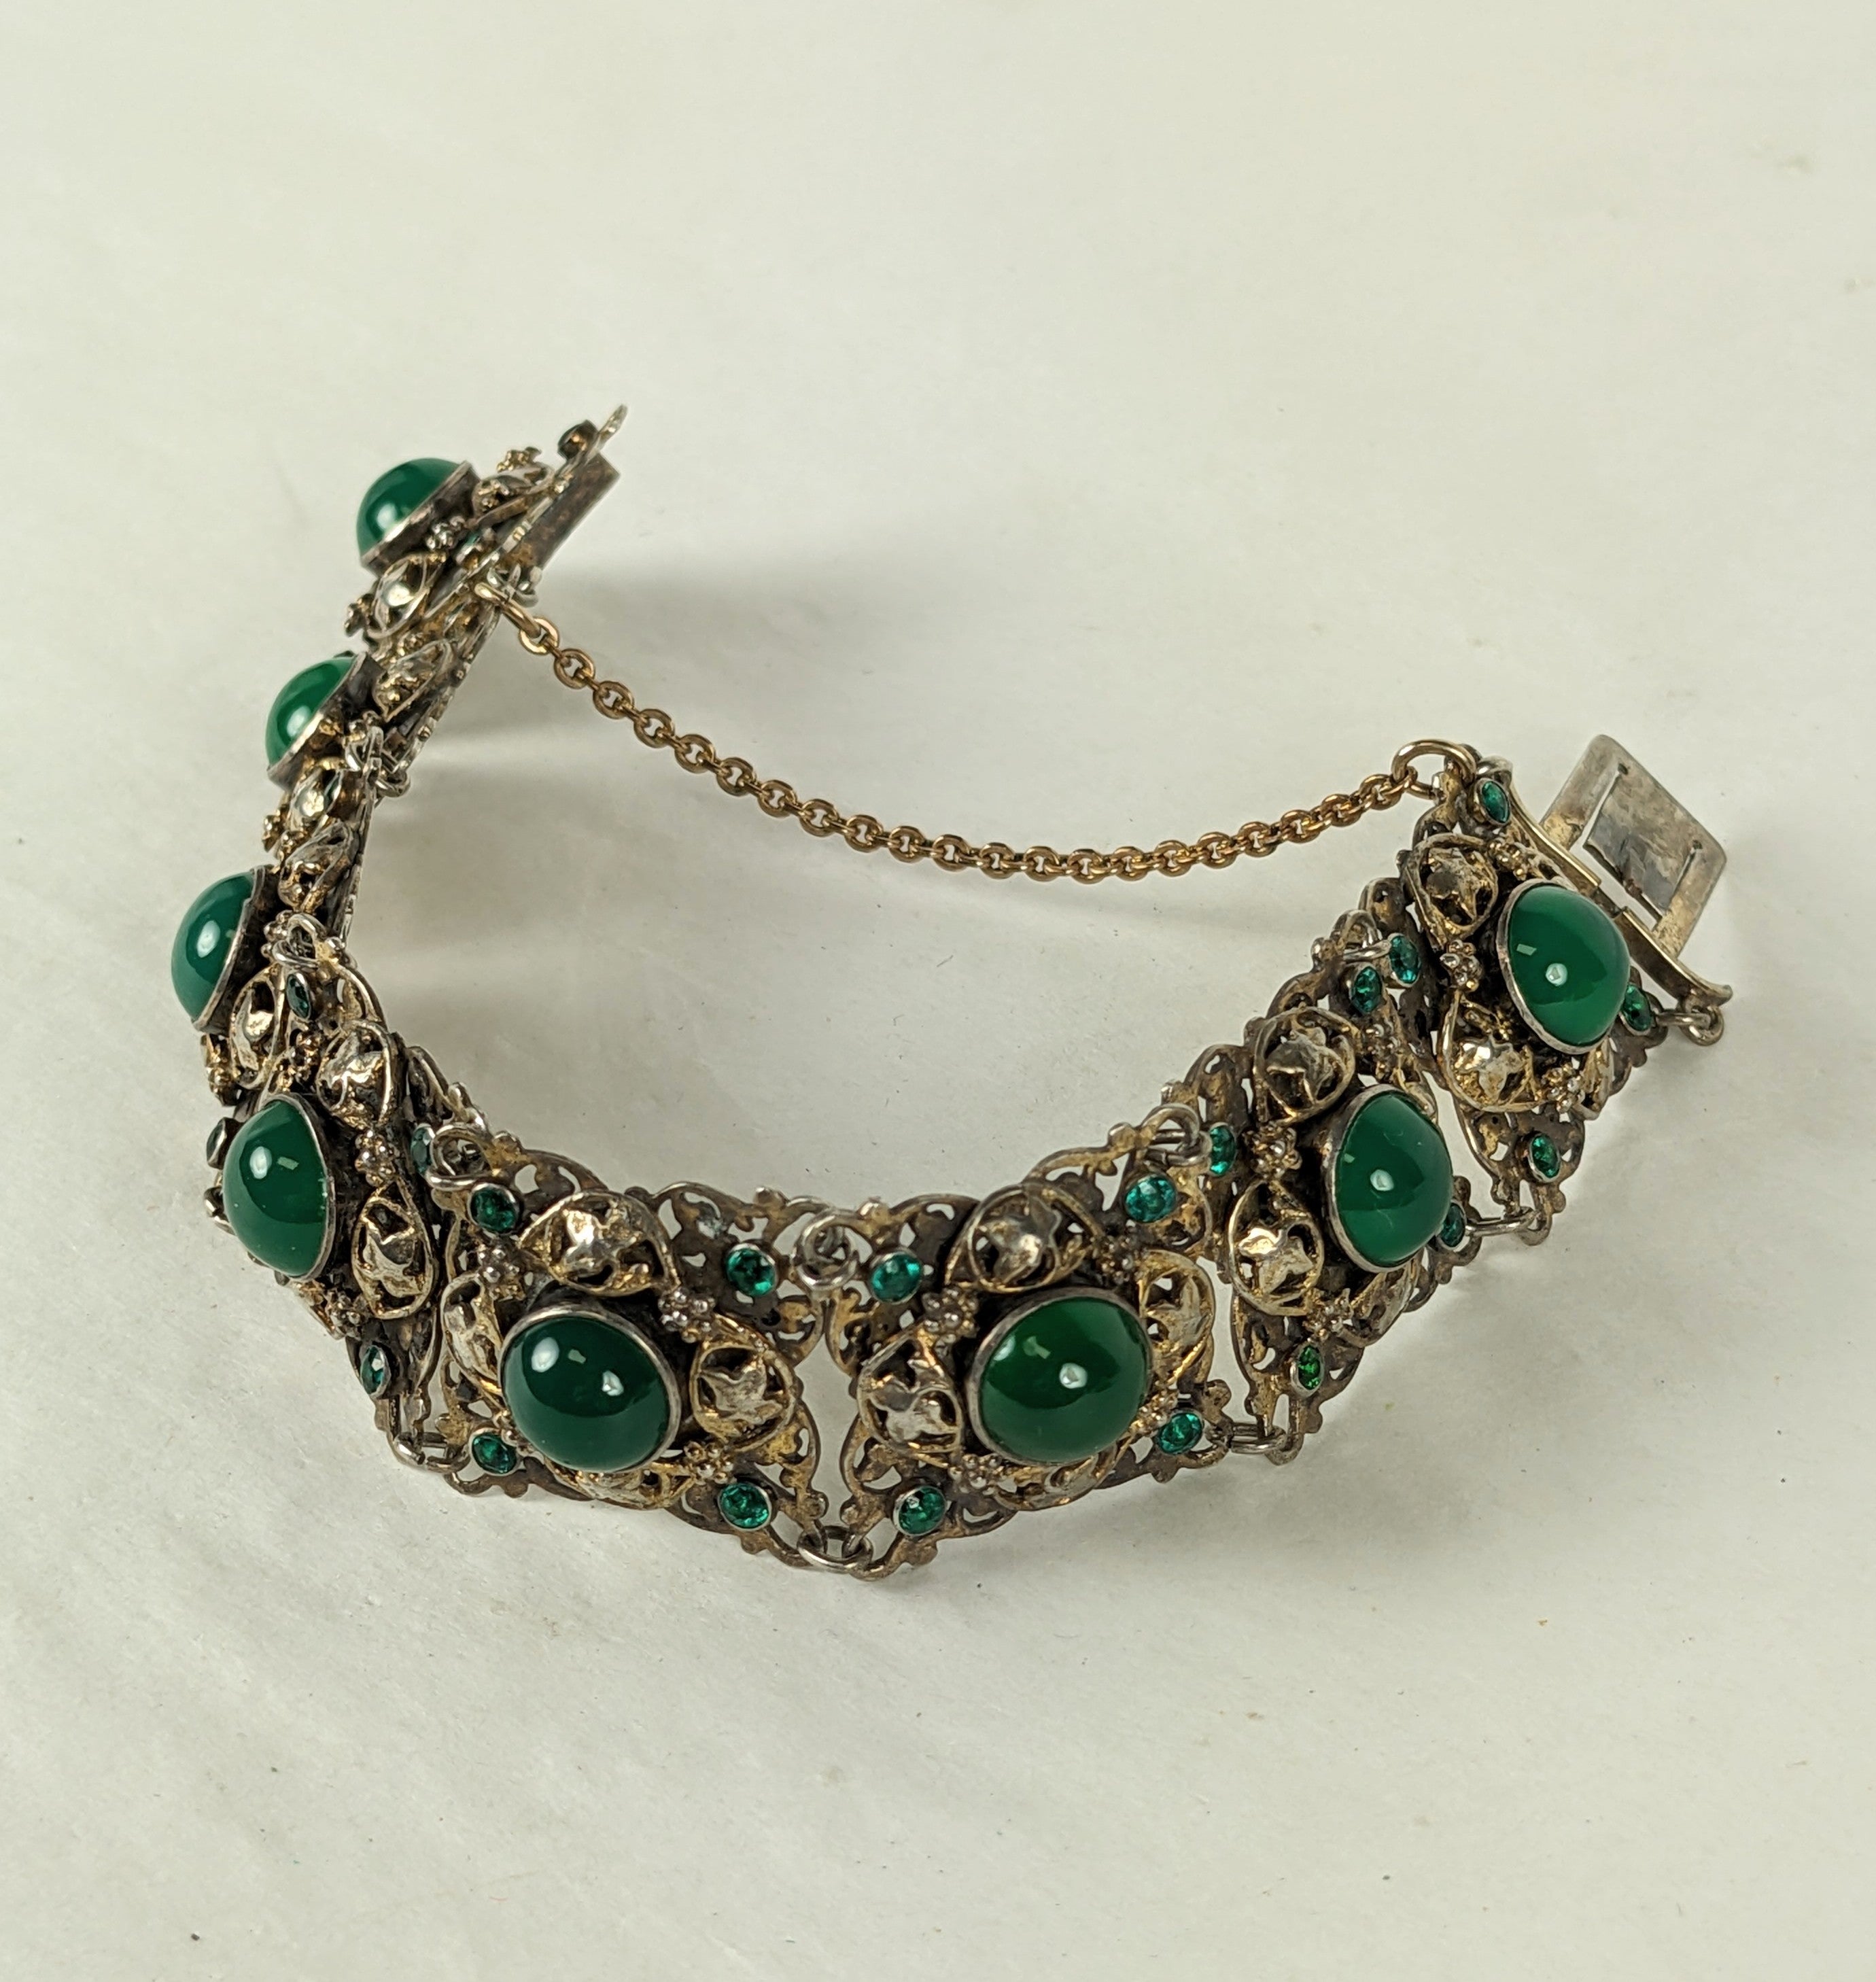 Lovely Hungarian Green Onyx Bracelet with emerald paste accents. Ornate metal work with floral and leaf motifs in silver with vermeil accents. 
1920's Hungarian. 7.25